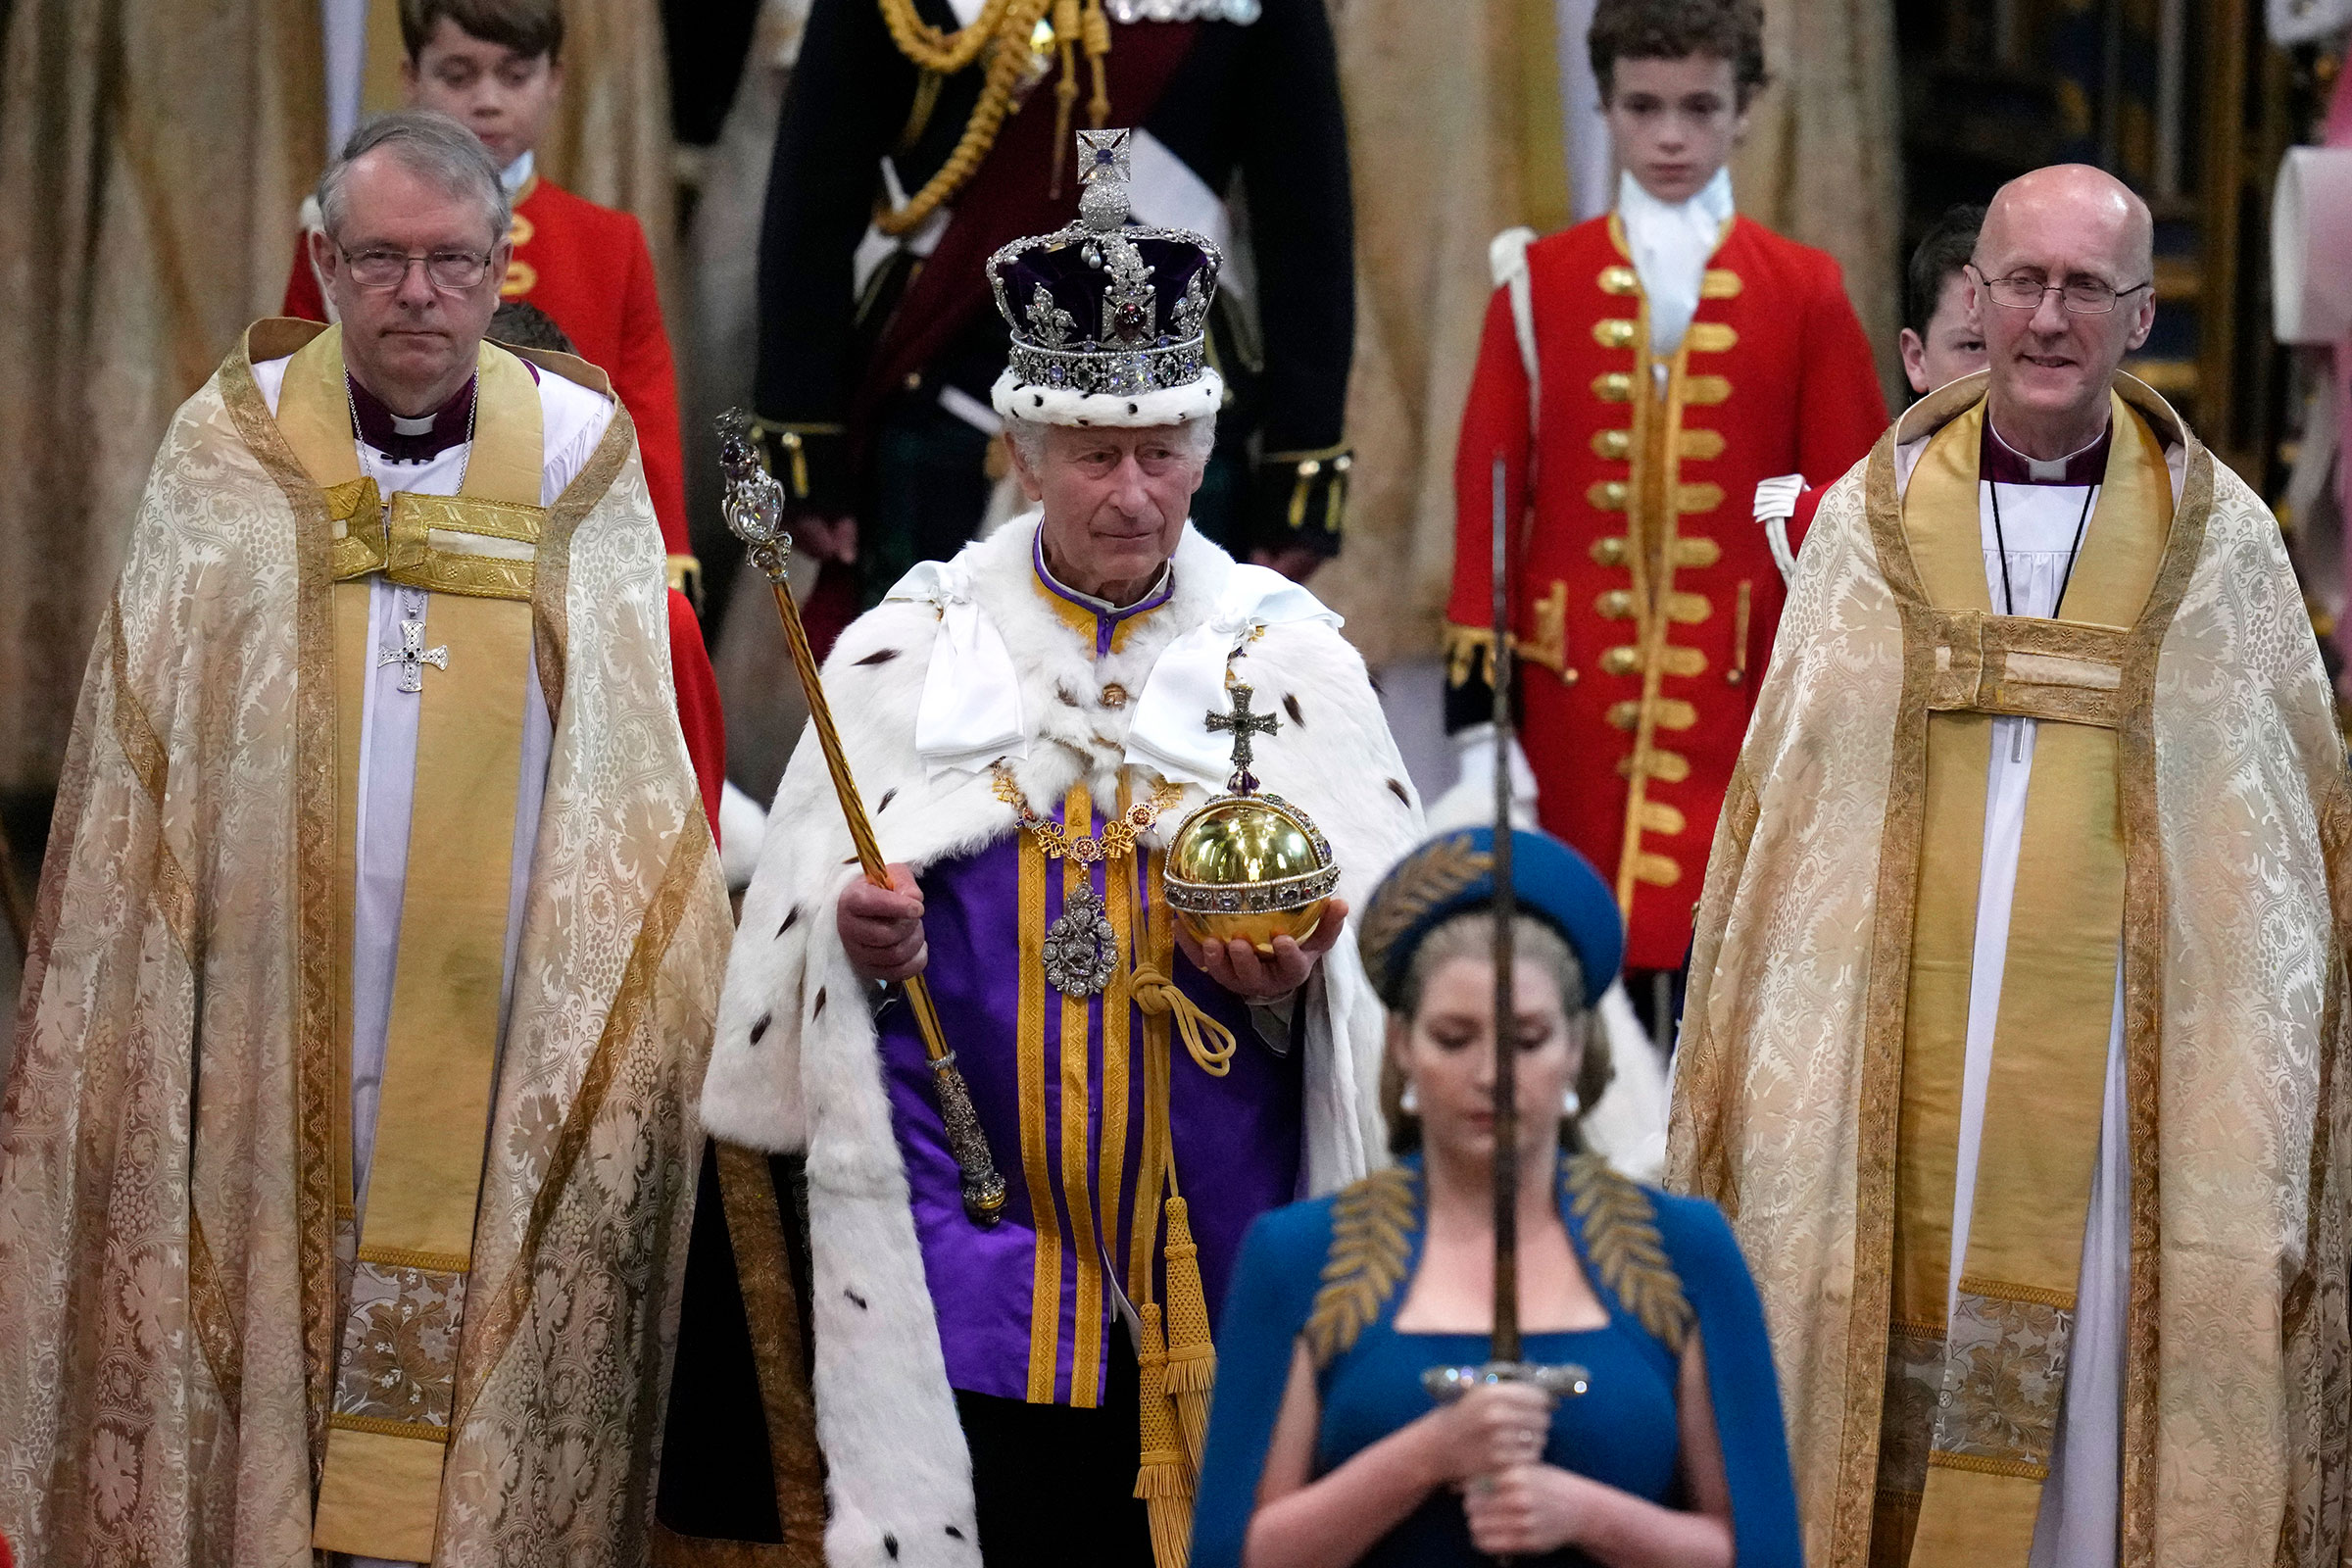 Britain's King Charles III walks in the Coronation Procession after his coronation ceremony. (Kirsty Wigglesworth—Pool/AP)